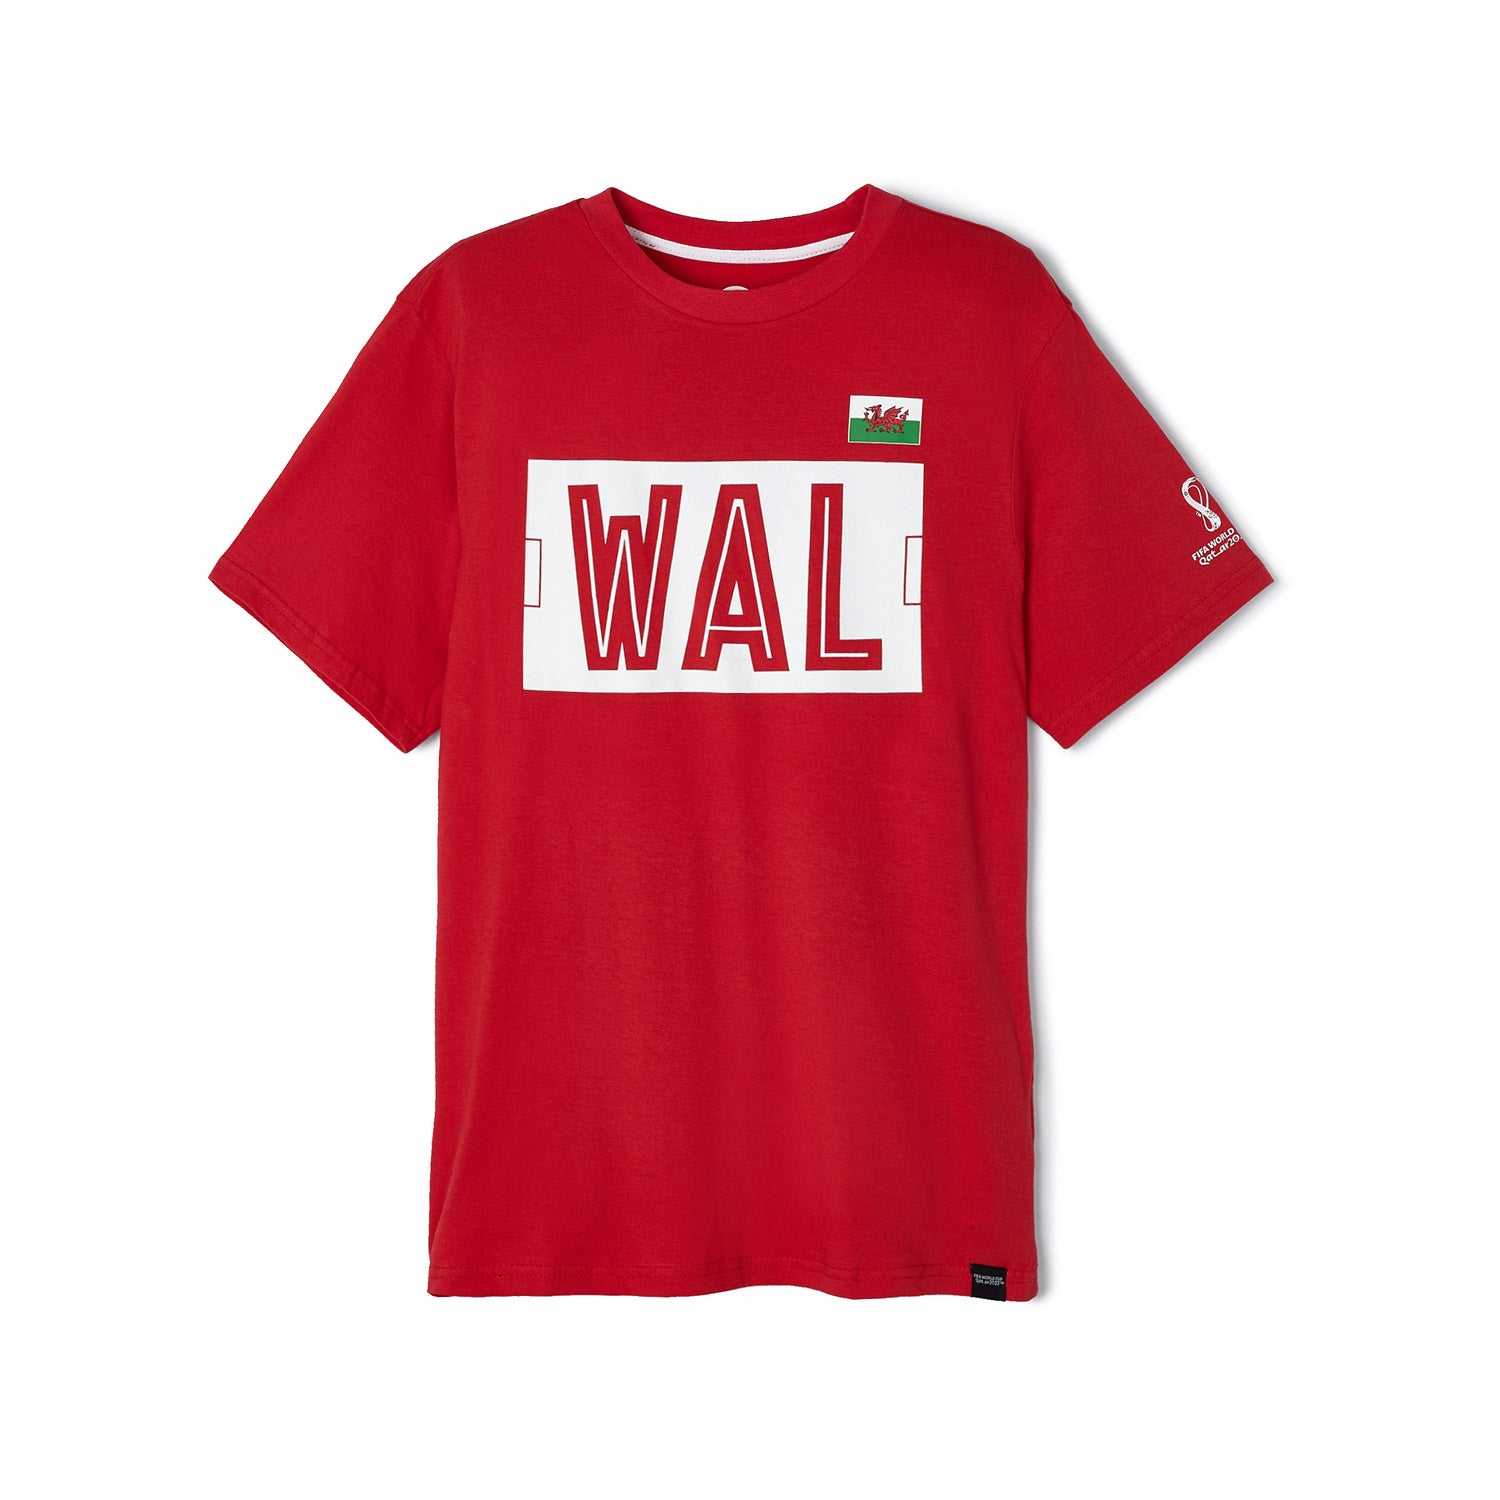 2022 World Cup Wales Red T-Shirt - Mens